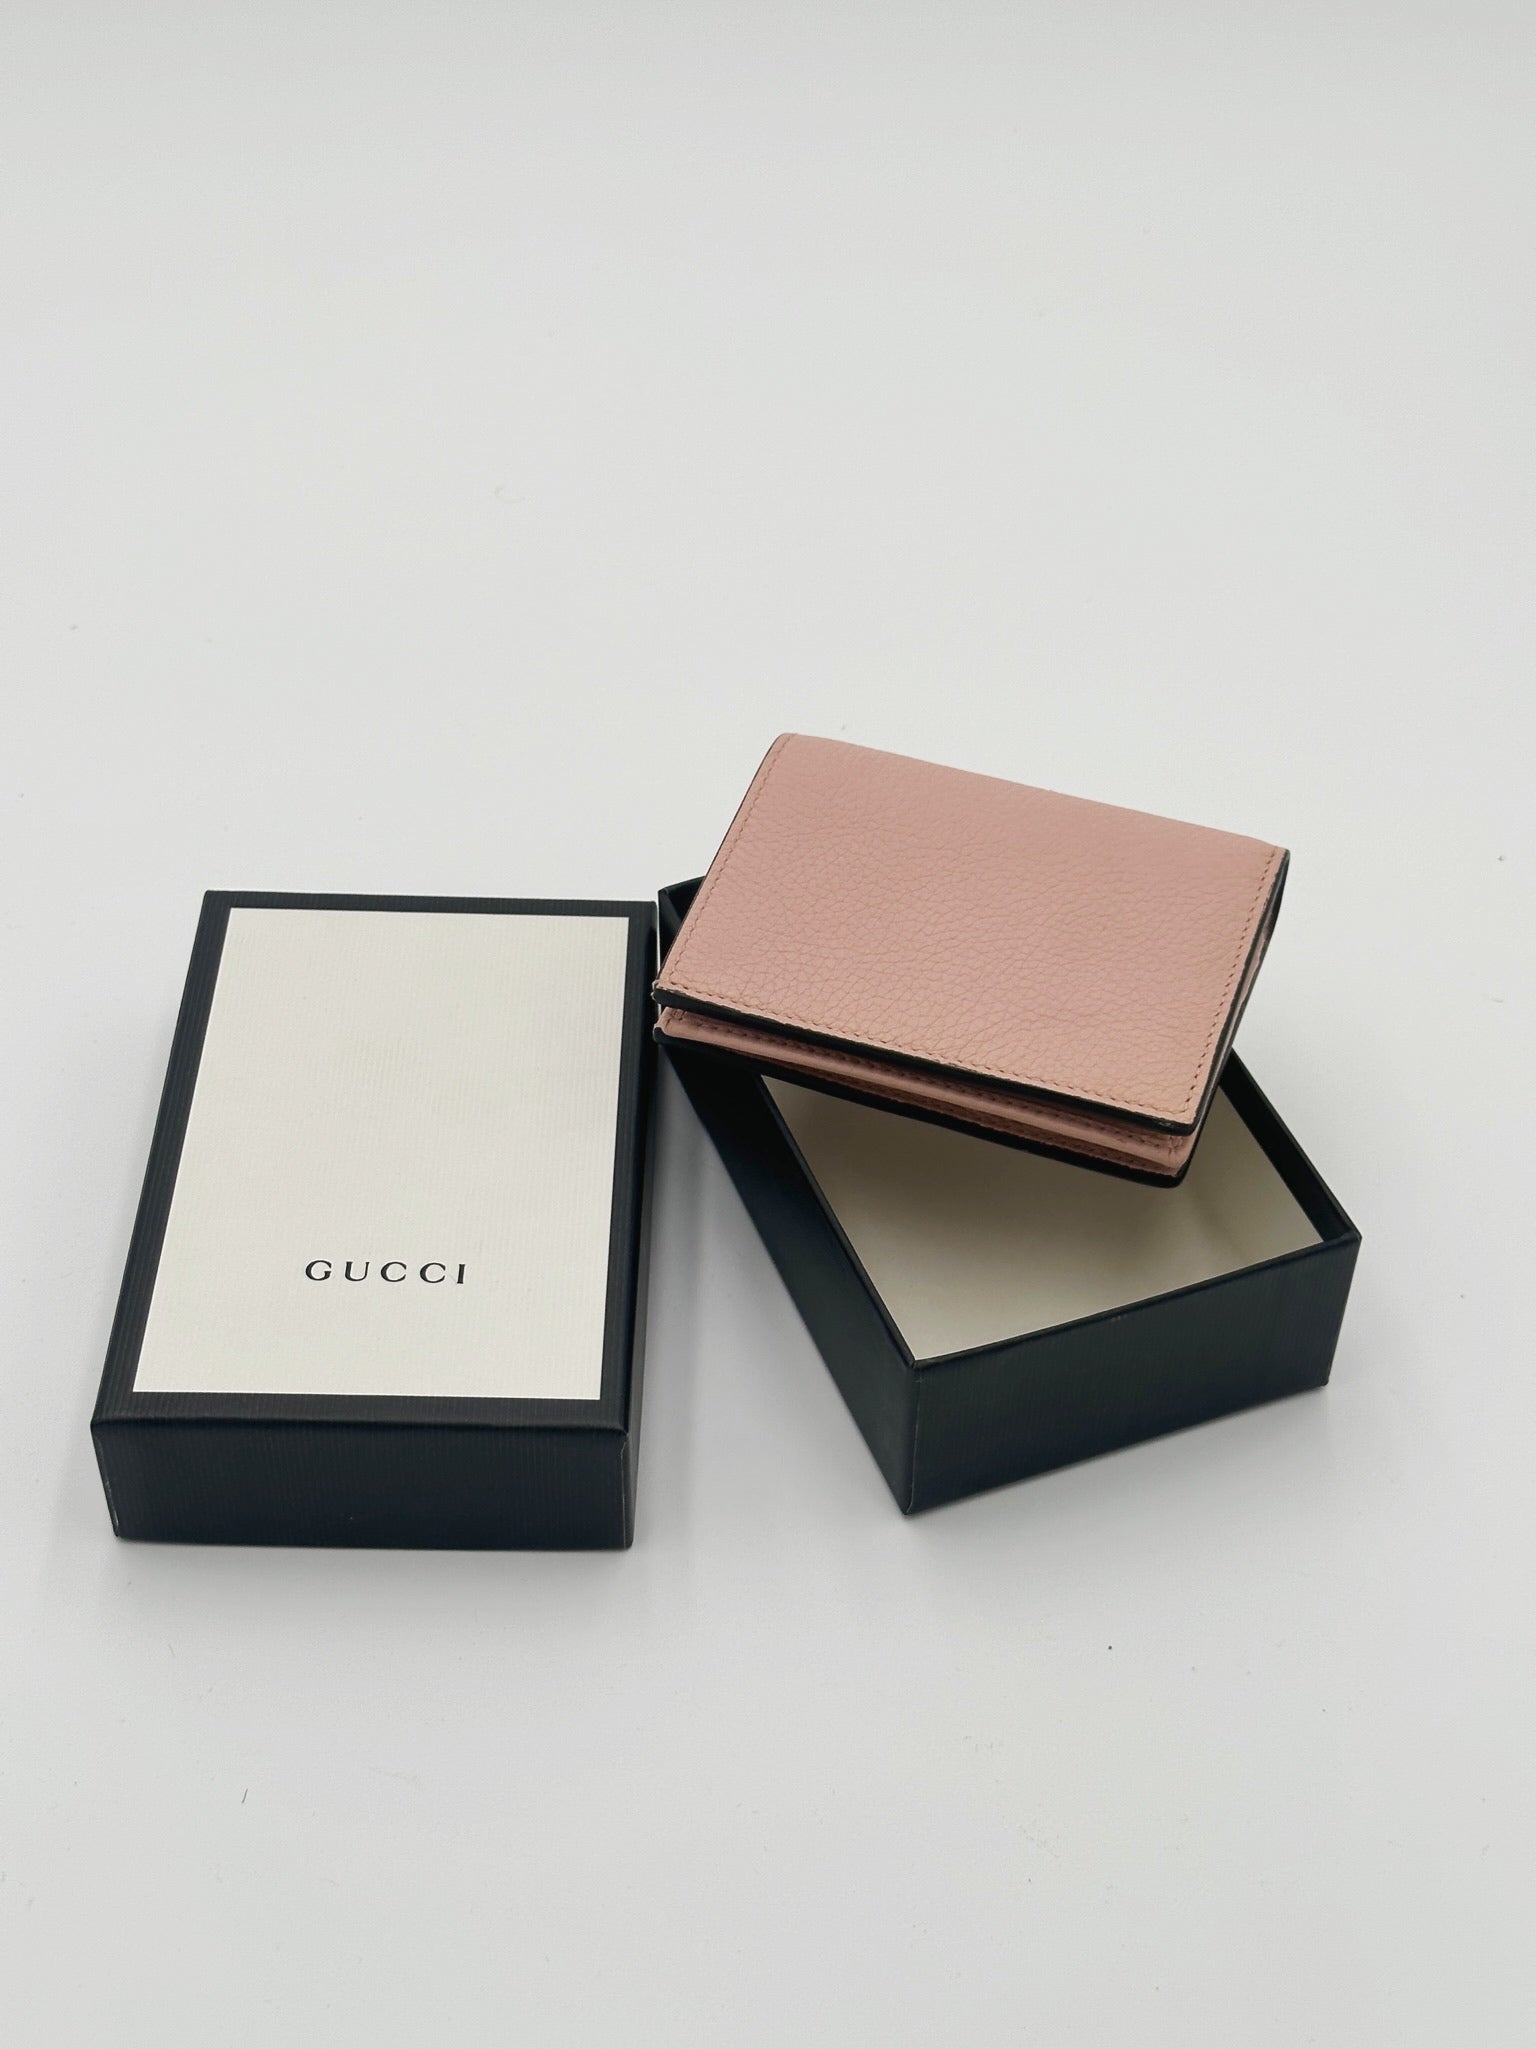 GUCCI "BLIND FOR LOVE" WITH A BEE PINK SMALL WALLET